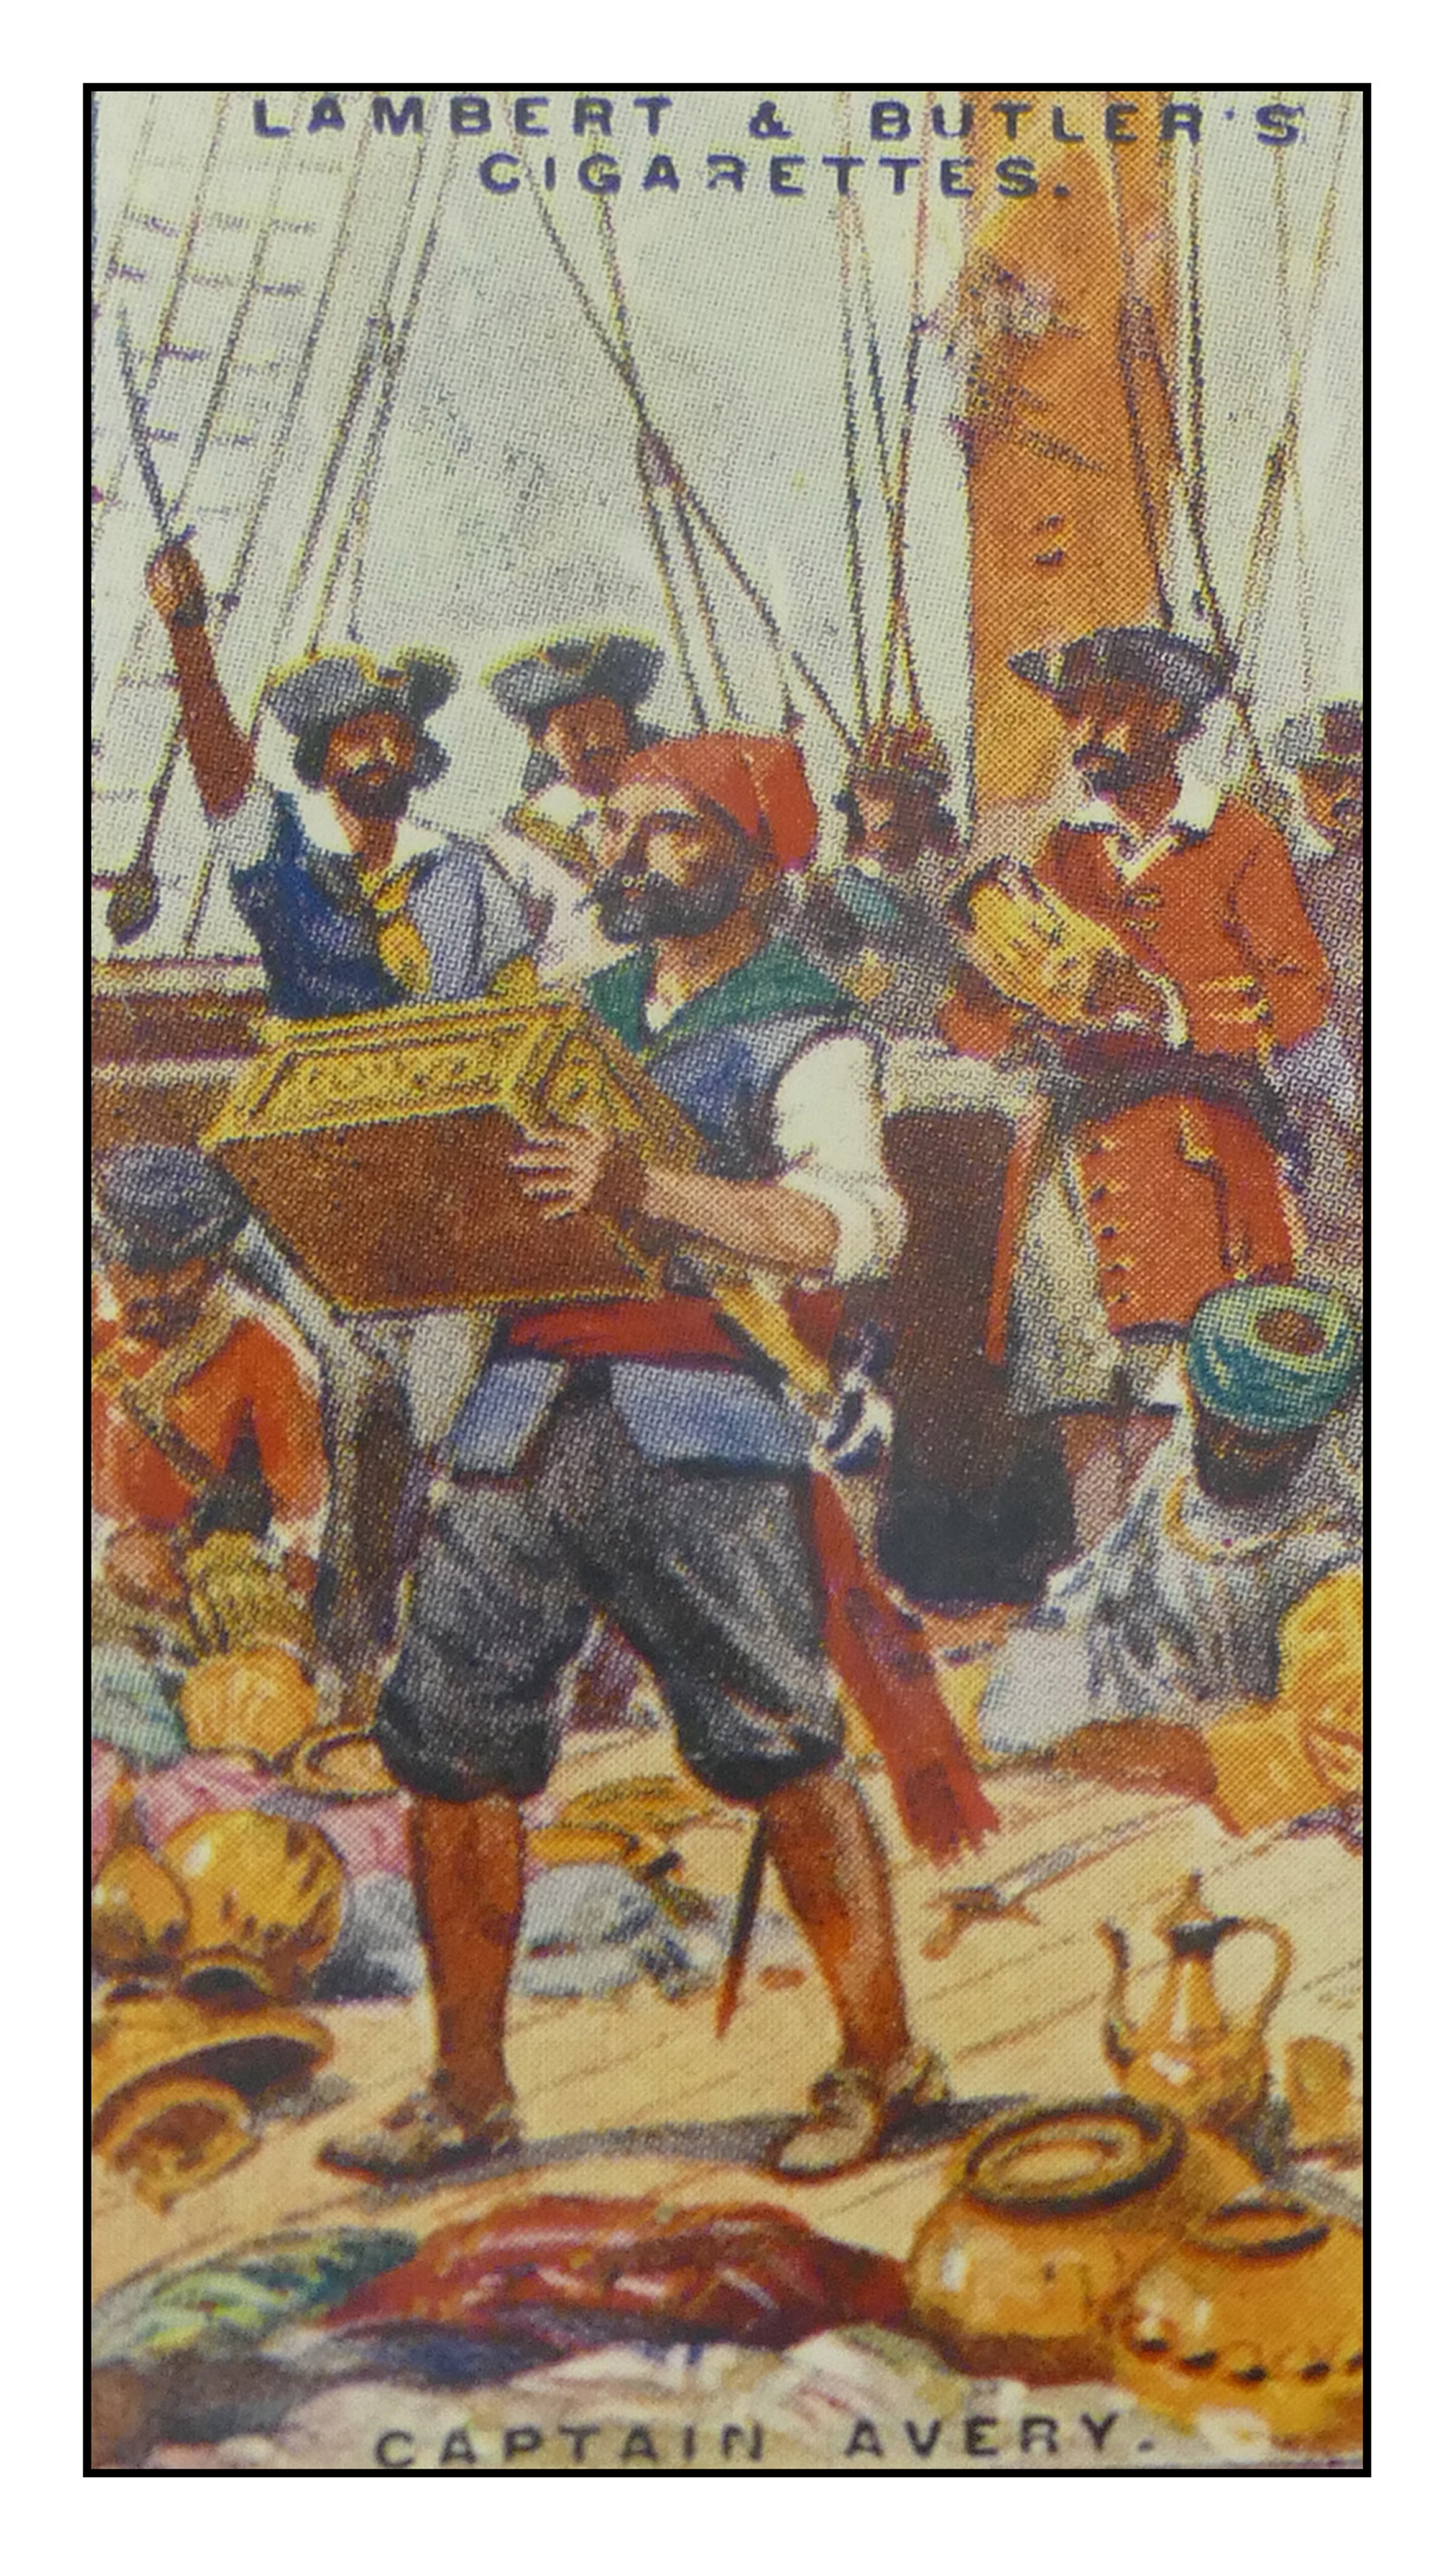 Seventeenth-century English pirate Henry Avery (front), one of history’s most famous maritime plunderers, depicted on a Lambert & Butler cigarette card.